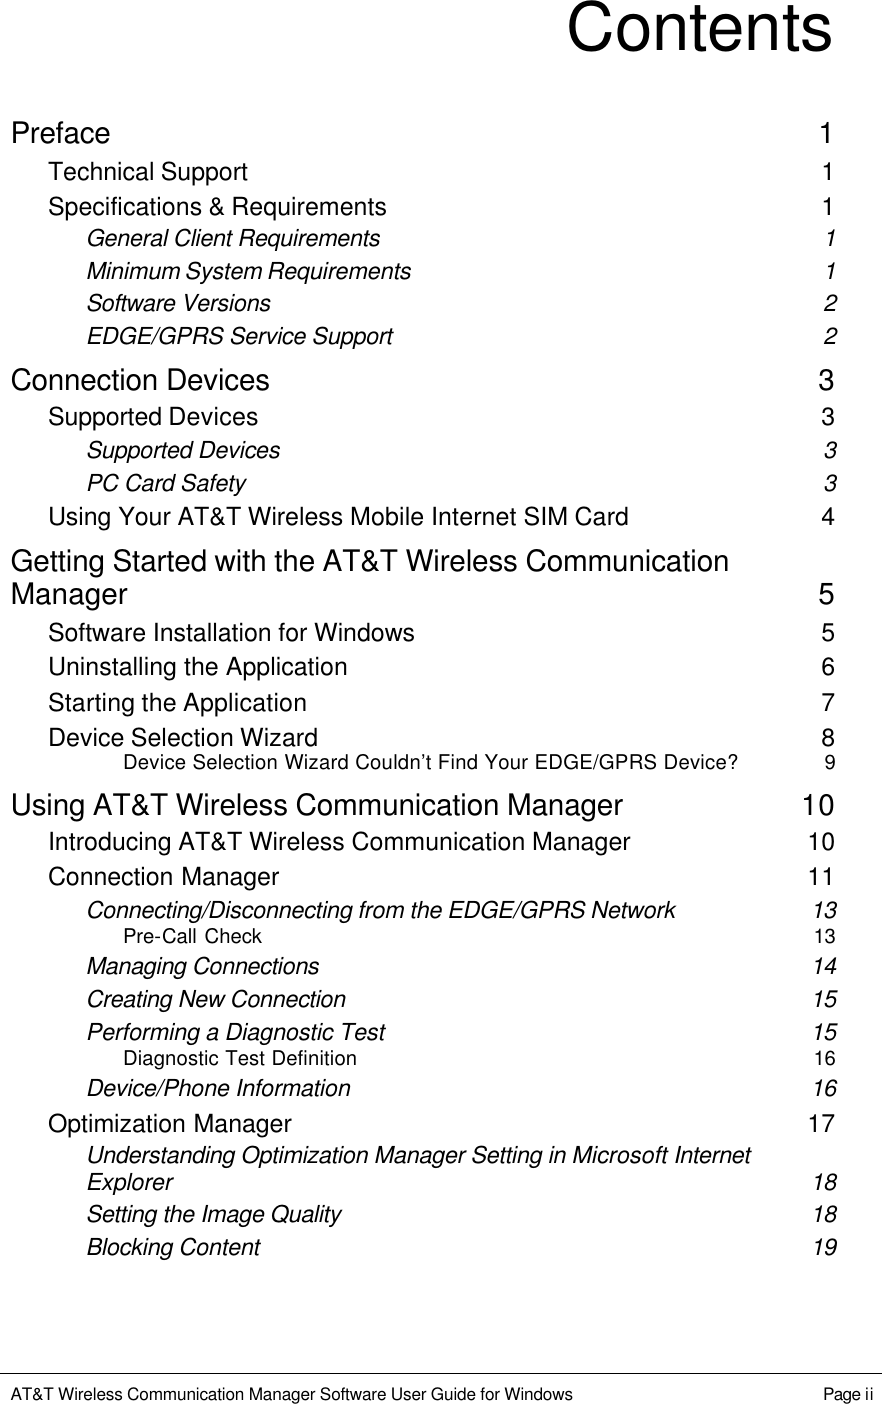   AT&amp;T Wireless Communication Manager Software User Guide for Windows    Page ii  Contents Preface 1 Technical Support 1 Specifications &amp; Requirements 1 General Client Requirements 1 Minimum System Requirements 1 Software Versions 2 EDGE/GPRS Service Support 2 Connection Devices 3 Supported Devices 3 Supported Devices 3 PC Card Safety 3 Using Your AT&amp;T Wireless Mobile Internet SIM Card 4 Getting Started with the AT&amp;T Wireless Communication Manager 5 Software Installation for Windows 5 Uninstalling the Application 6 Starting the Application 7 Device Selection Wizard 8 Device Selection Wizard Couldn’t Find Your EDGE/GPRS Device? 9 Using AT&amp;T Wireless Communication Manager 10 Introducing AT&amp;T Wireless Communication Manager 10 Connection Manager 11 Connecting/Disconnecting from the EDGE/GPRS Network 13 Pre-Call Check 13 Managing Connections 14 Creating New Connection 15 Performing a Diagnostic Test 15 Diagnostic Test Definition 16 Device/Phone Information 16 Optimization Manager 17 Understanding Optimization Manager Setting in Microsoft Internet Explorer 18 Setting the Image Quality 18 Blocking Content 19 